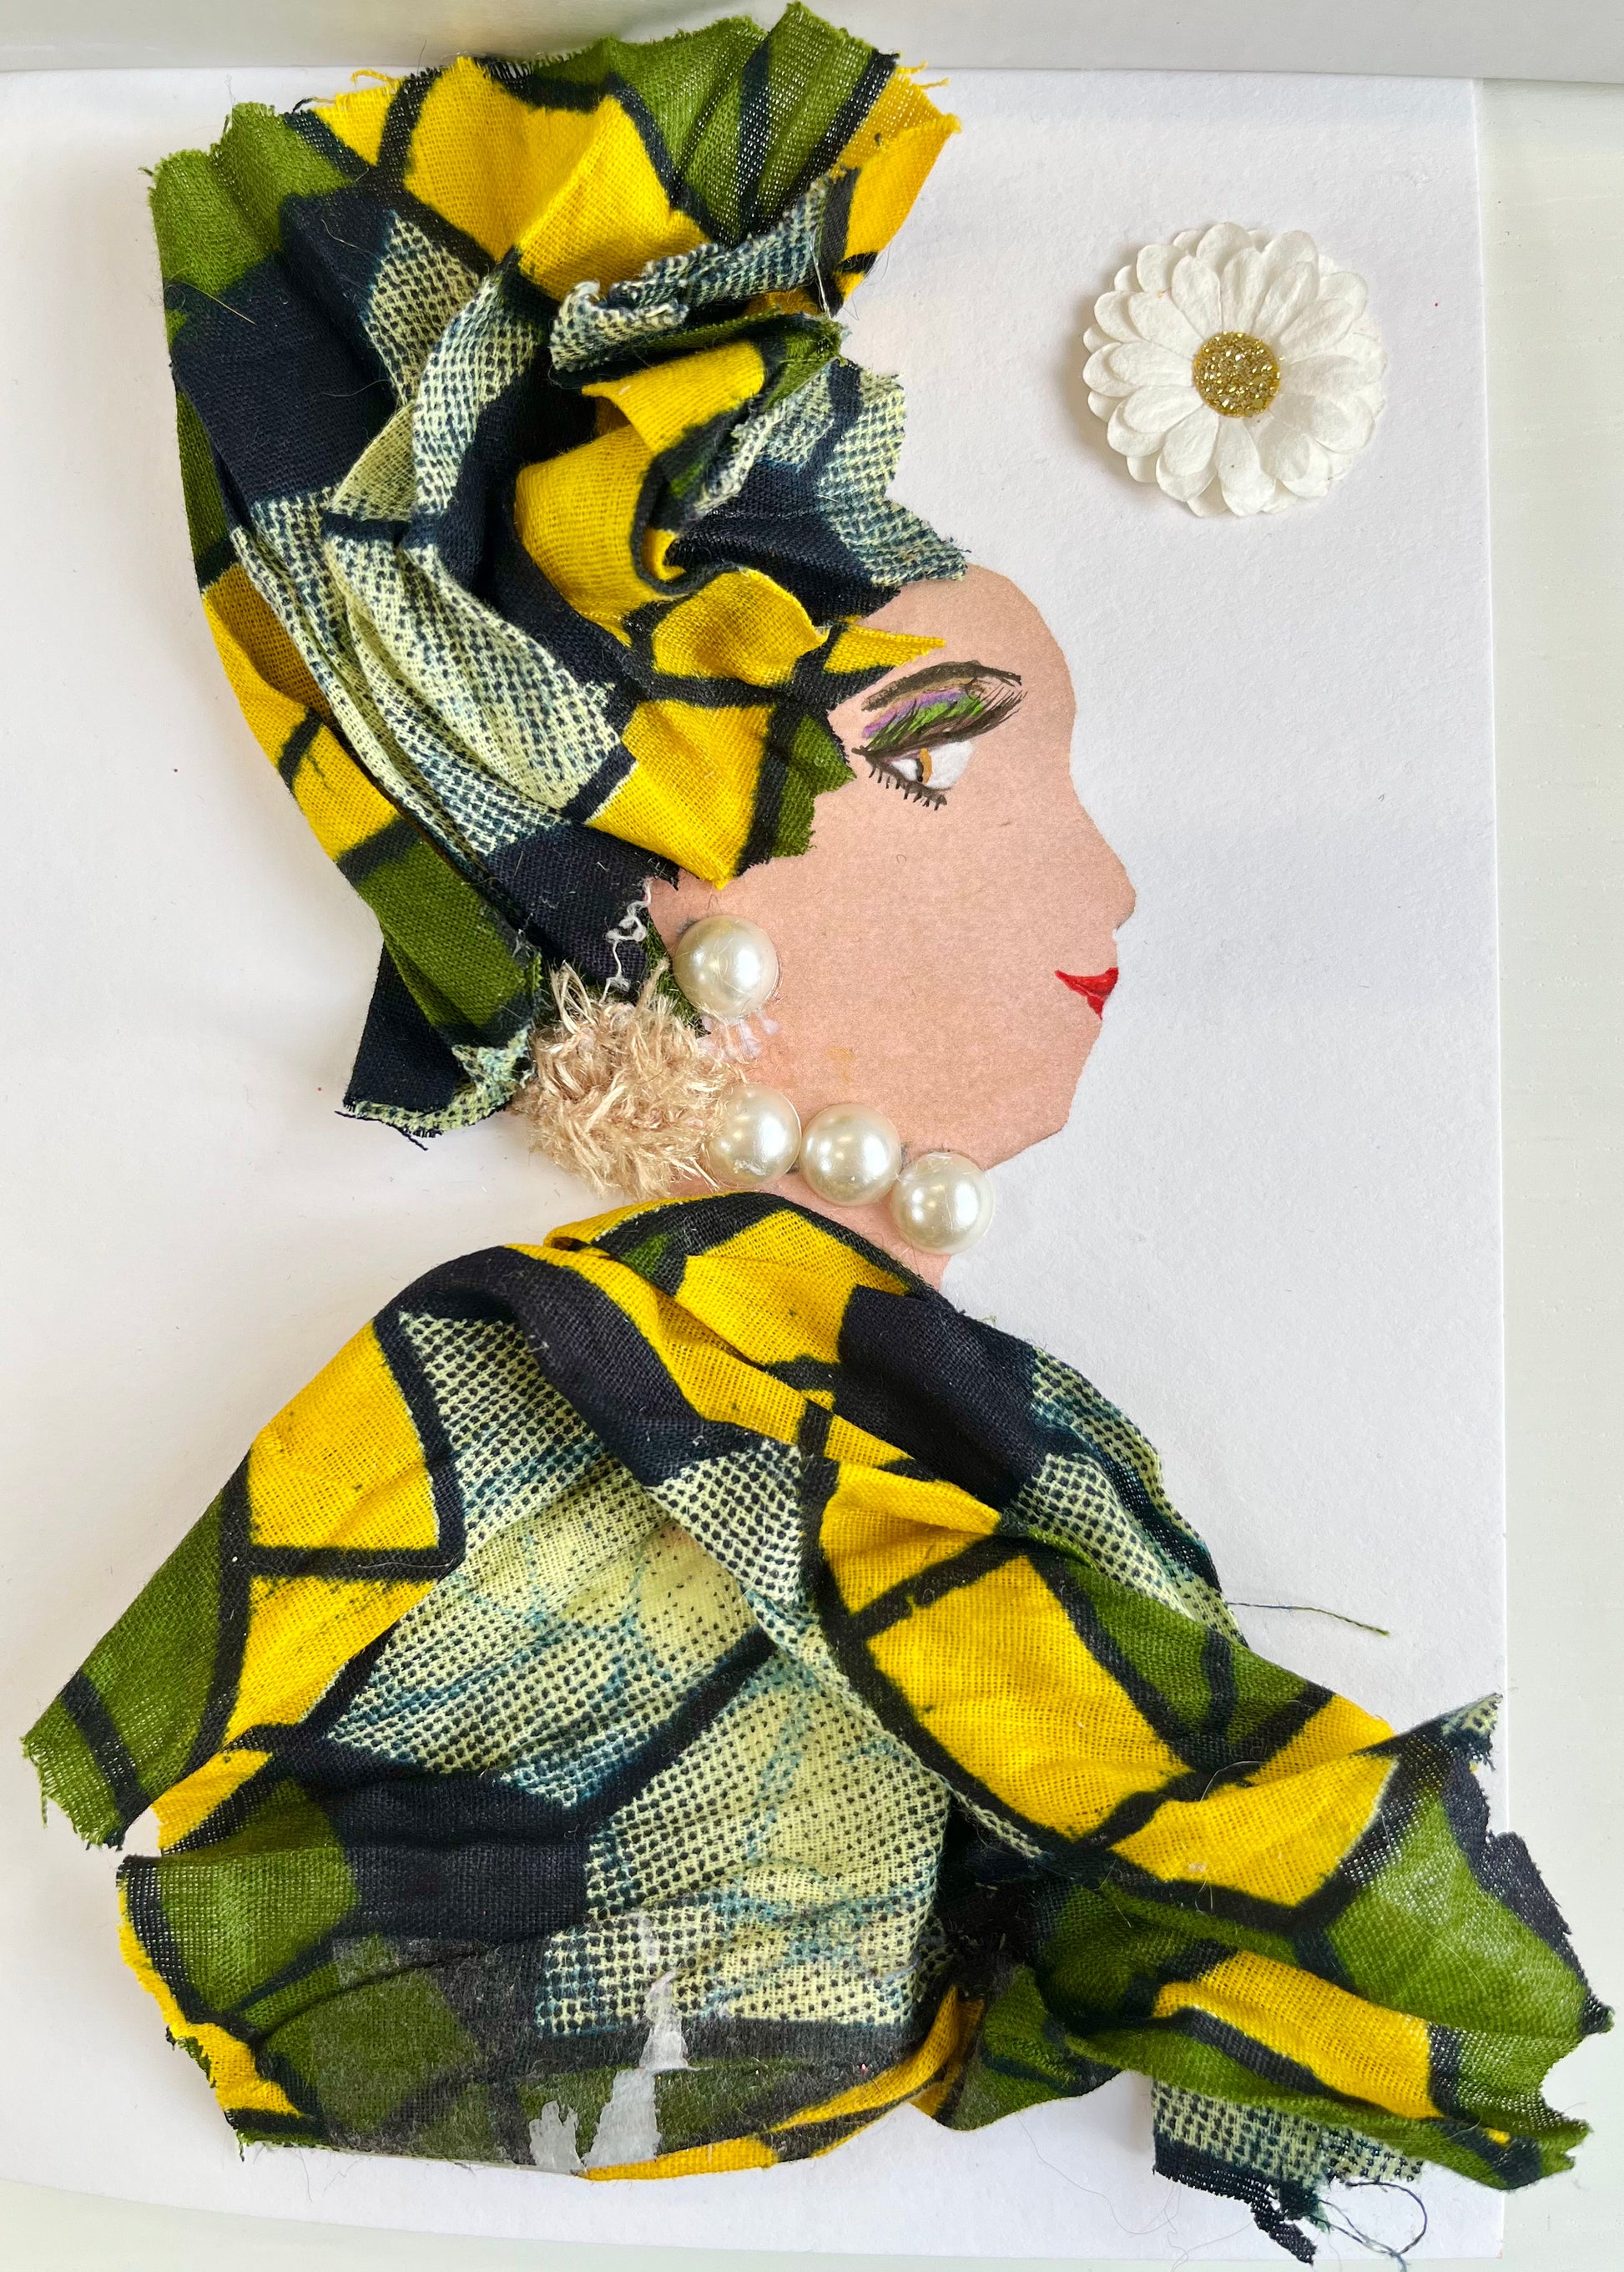 This card shows a woman wearing a green and yellow geometric printed dress and headscarf. She wears a pearl necklace and earrings, and there is a white daisy in the background